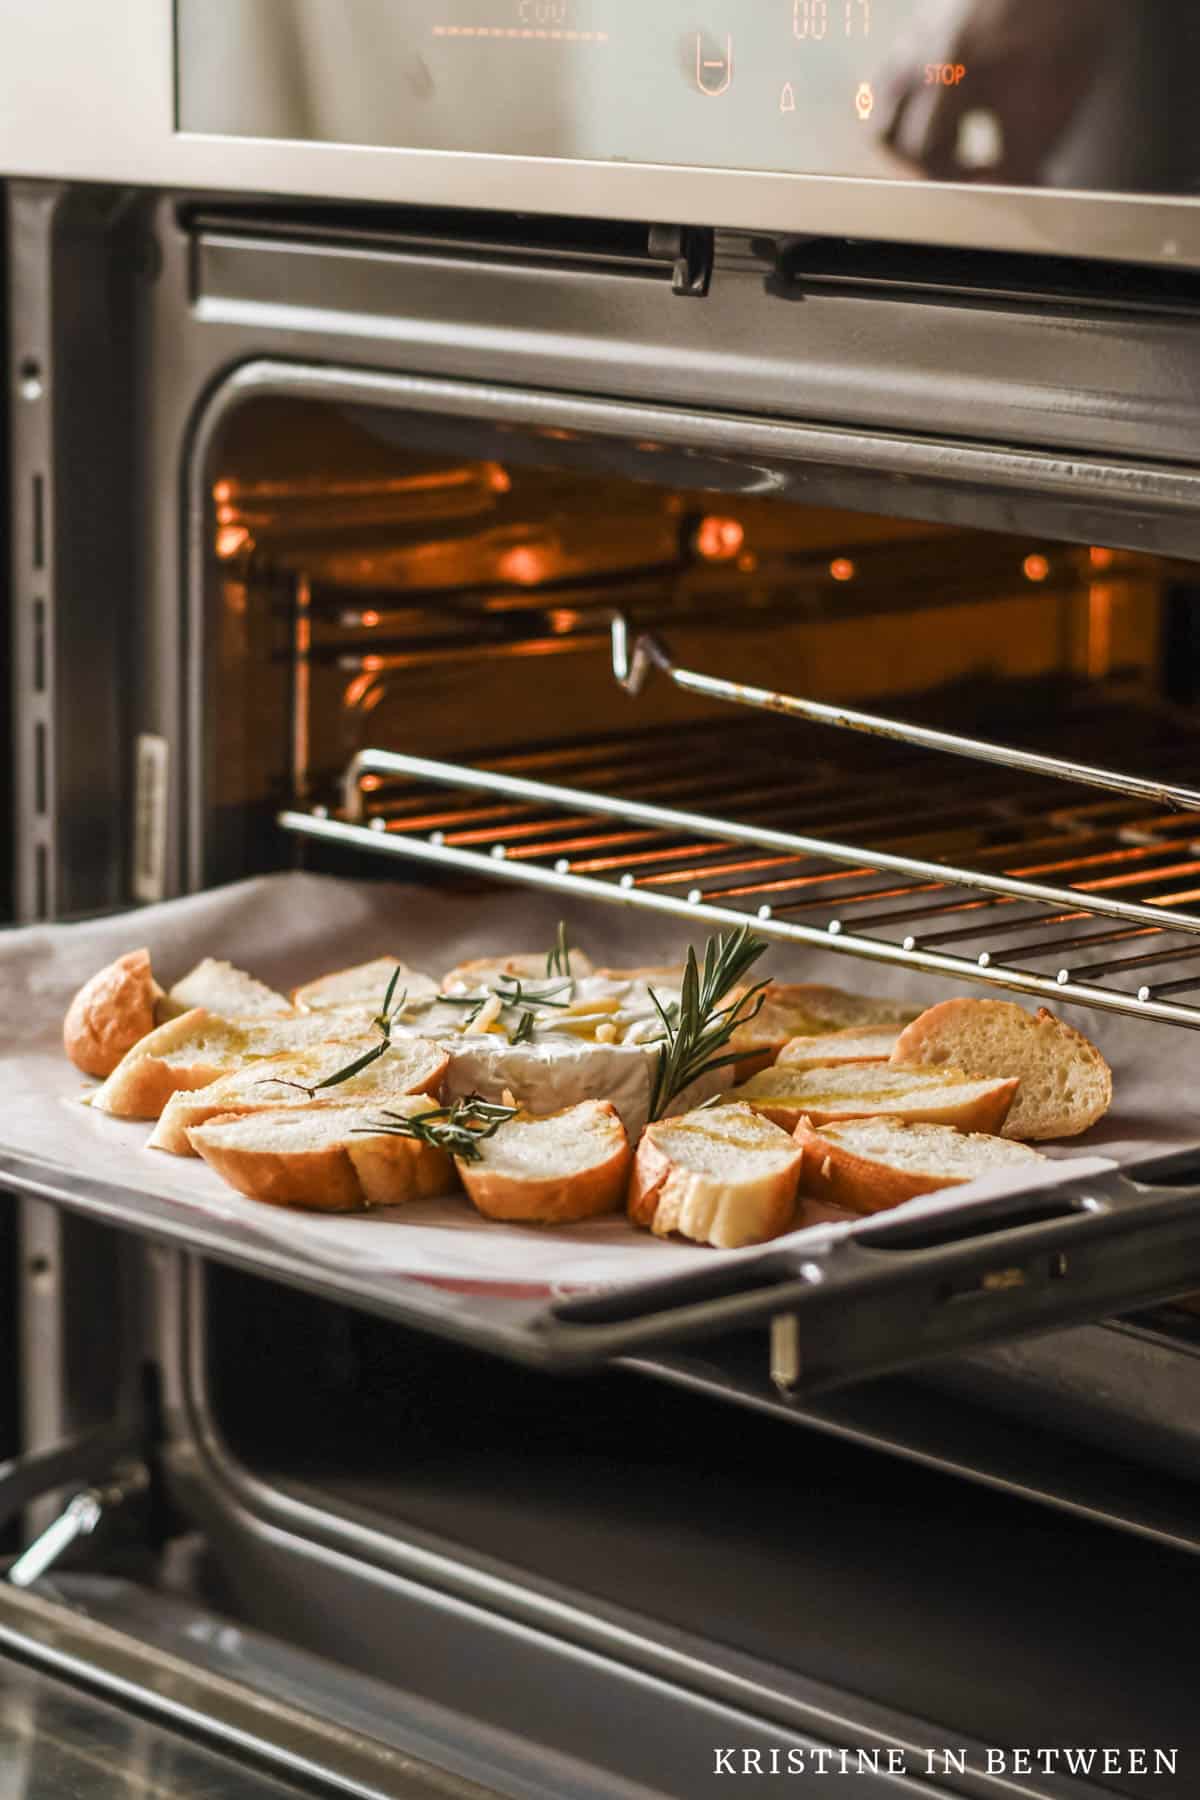 An open oven with a sheet of baked bread sitting on the rack.